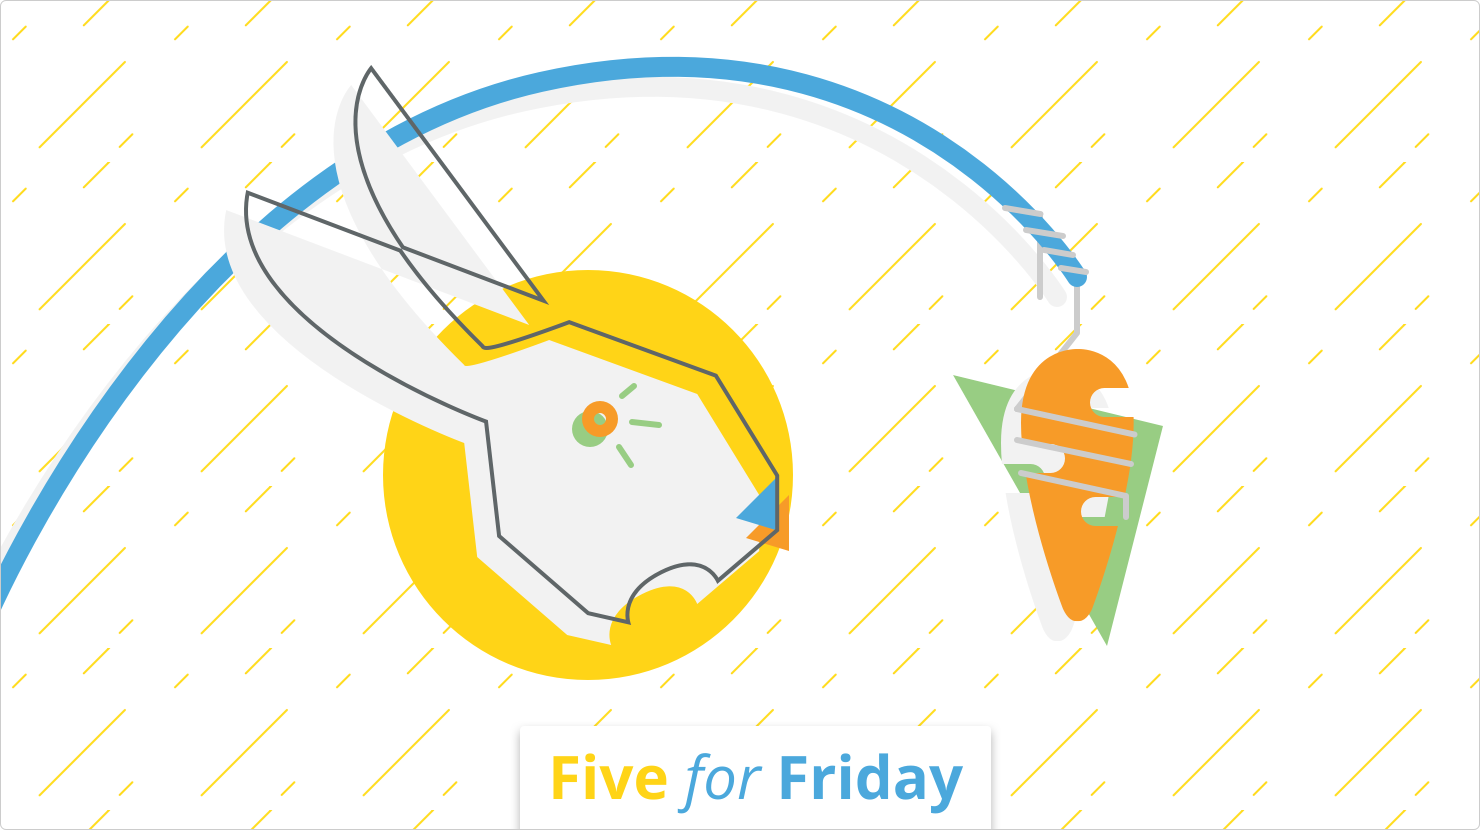 Five for Friday: Motivation in the workplace